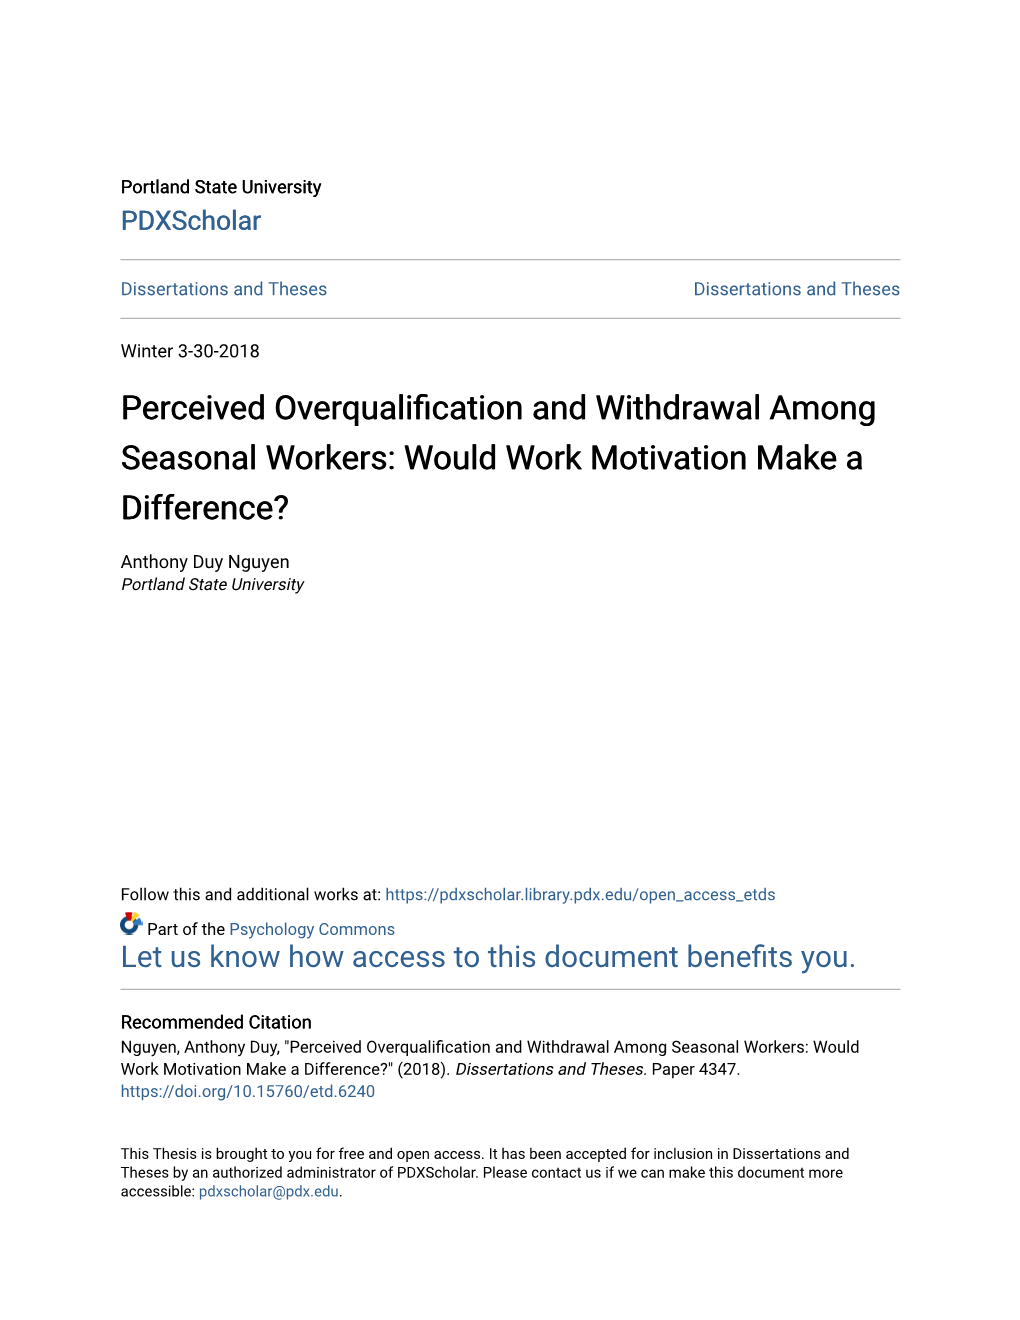 Perceived Overqualification and Withdrawal Among Seasonal Workers: Would Work Motivation Make a Difference?